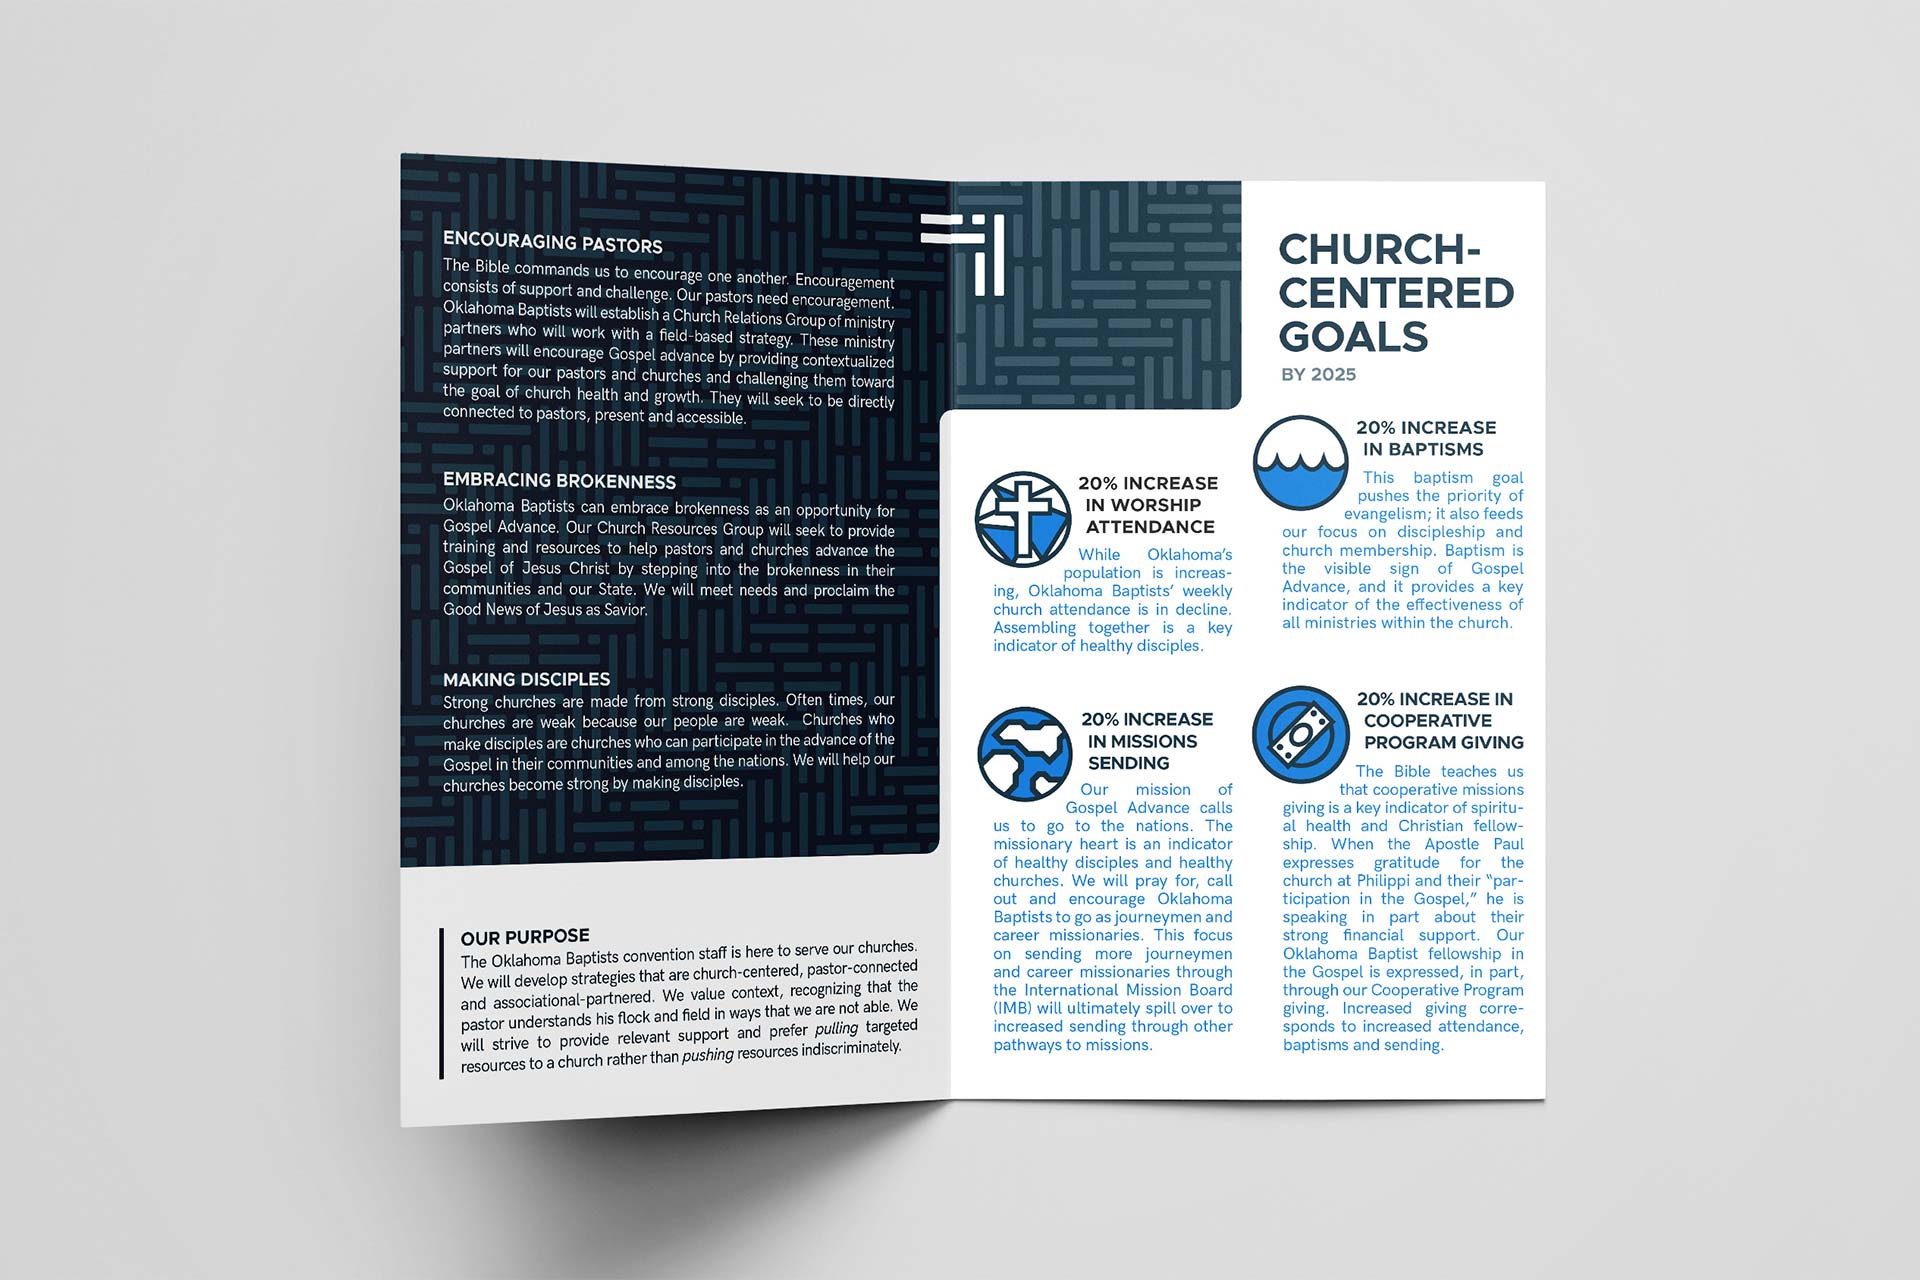 A bifold brochure to introduce the new Oklahoma Baptists brand and vision